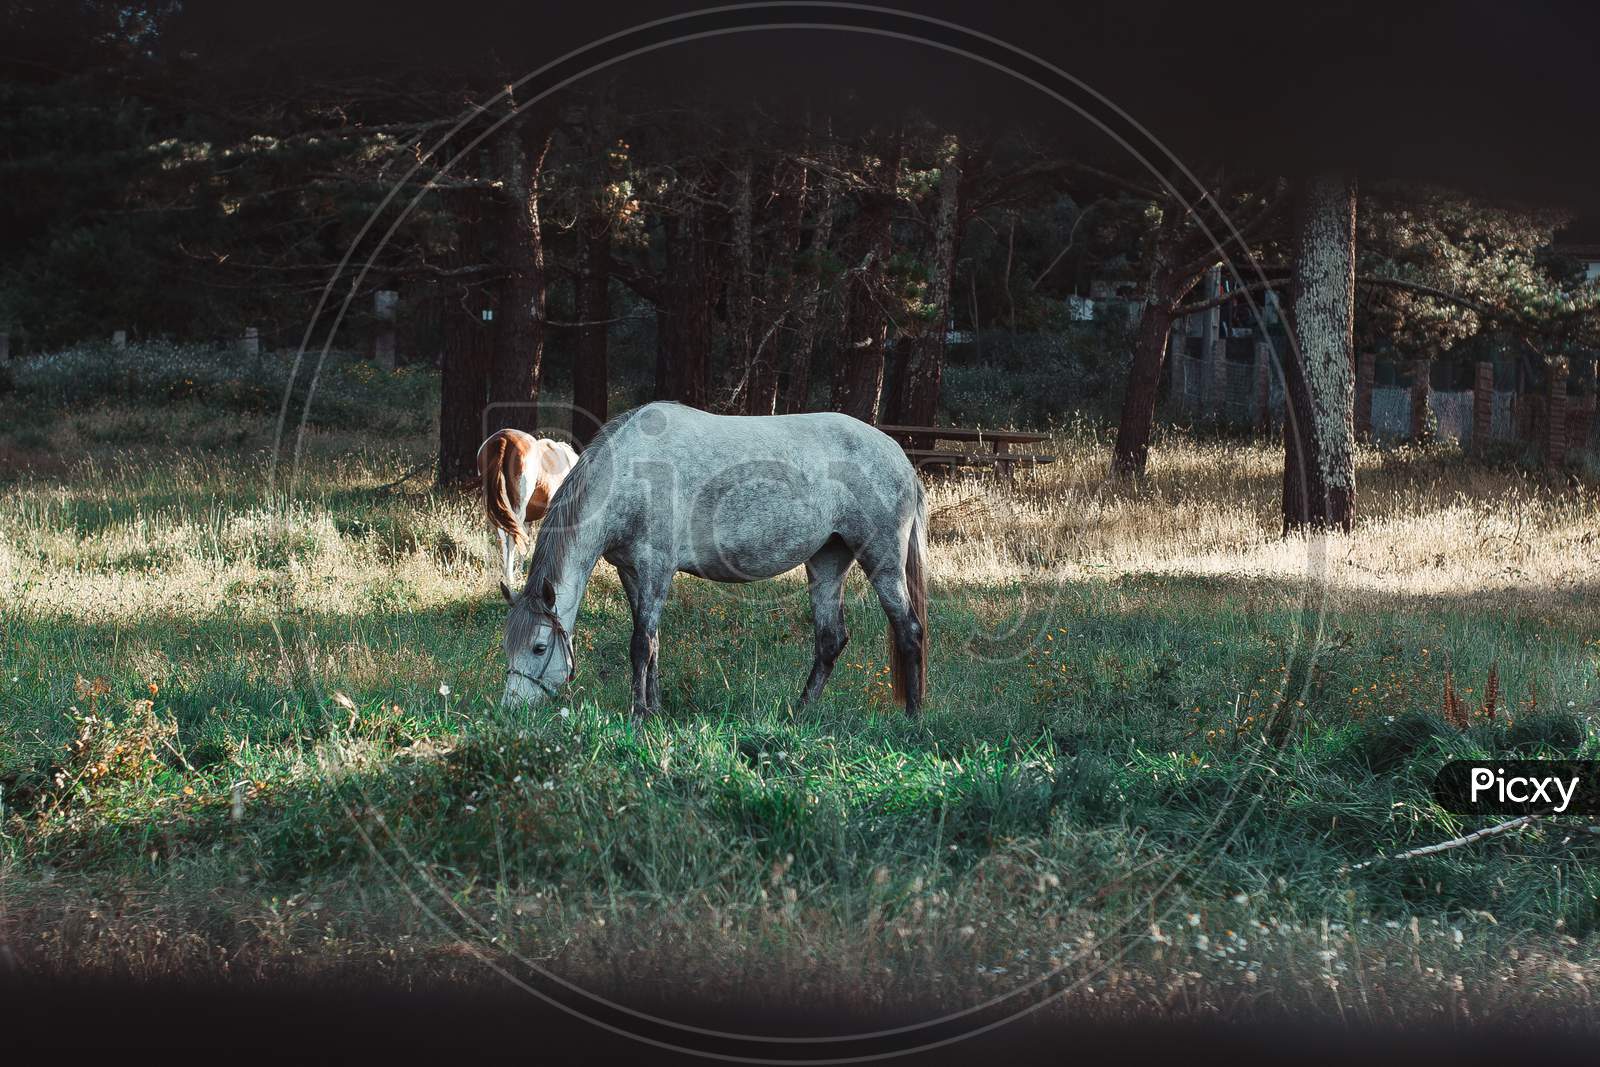 Shot From The Fence Of A White Horse Eating Grass